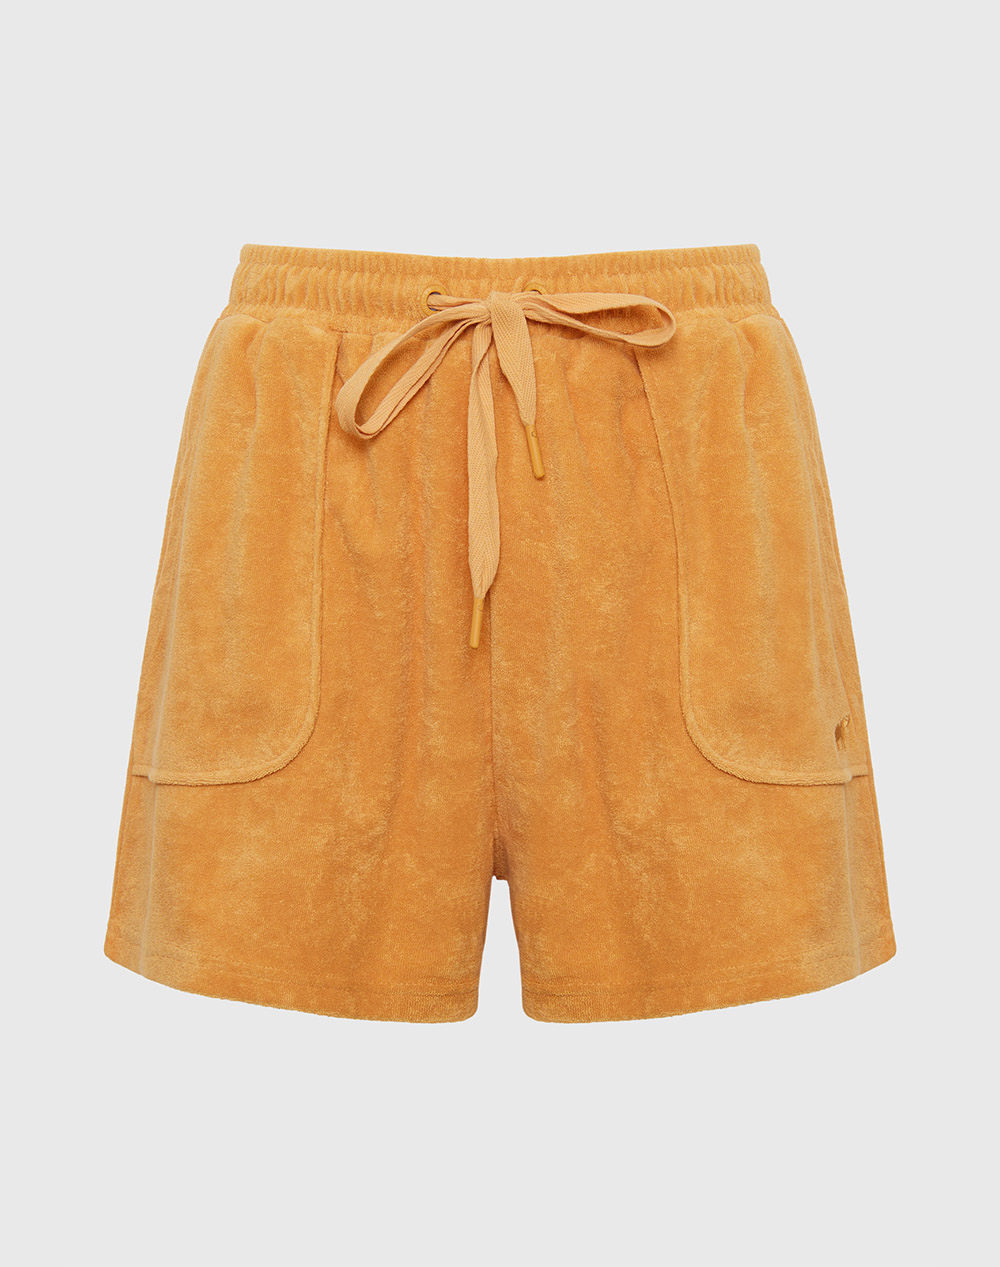 Jogger shorts in towel terry fabric